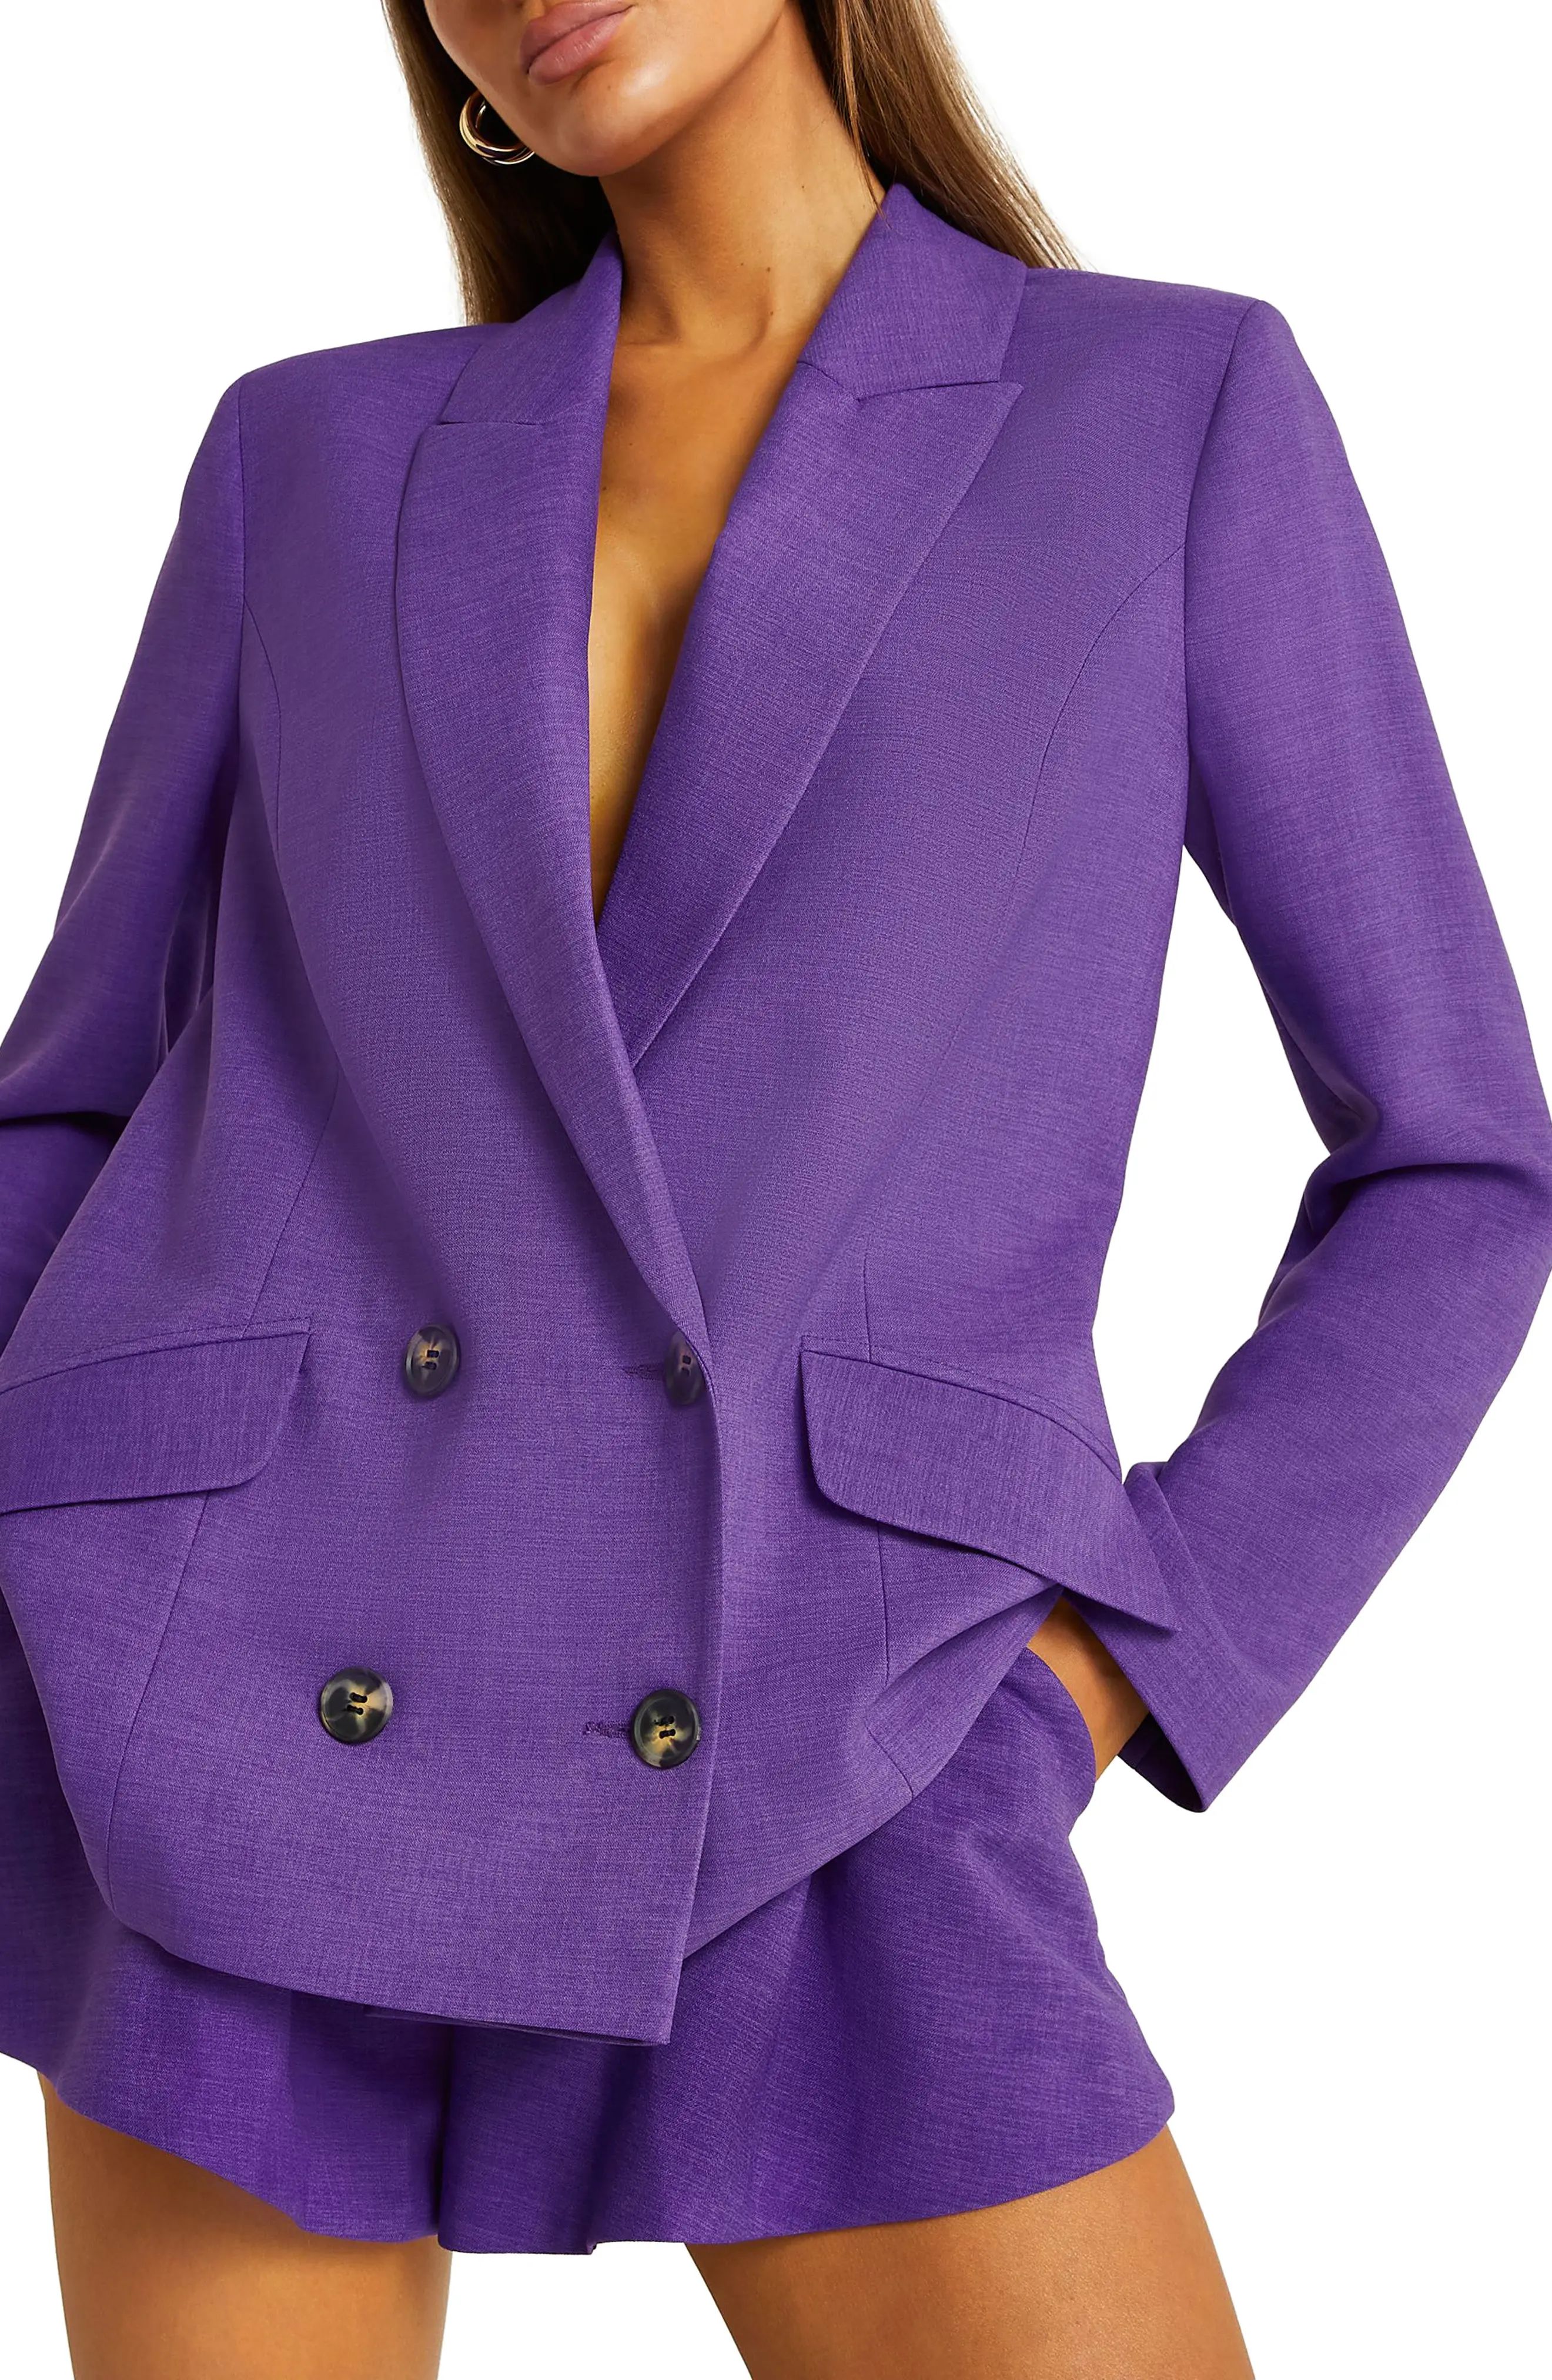 River Island Structured Double Breasted Blazer in Medium Purple at Nordstrom, Size 10 Us | Nordstrom